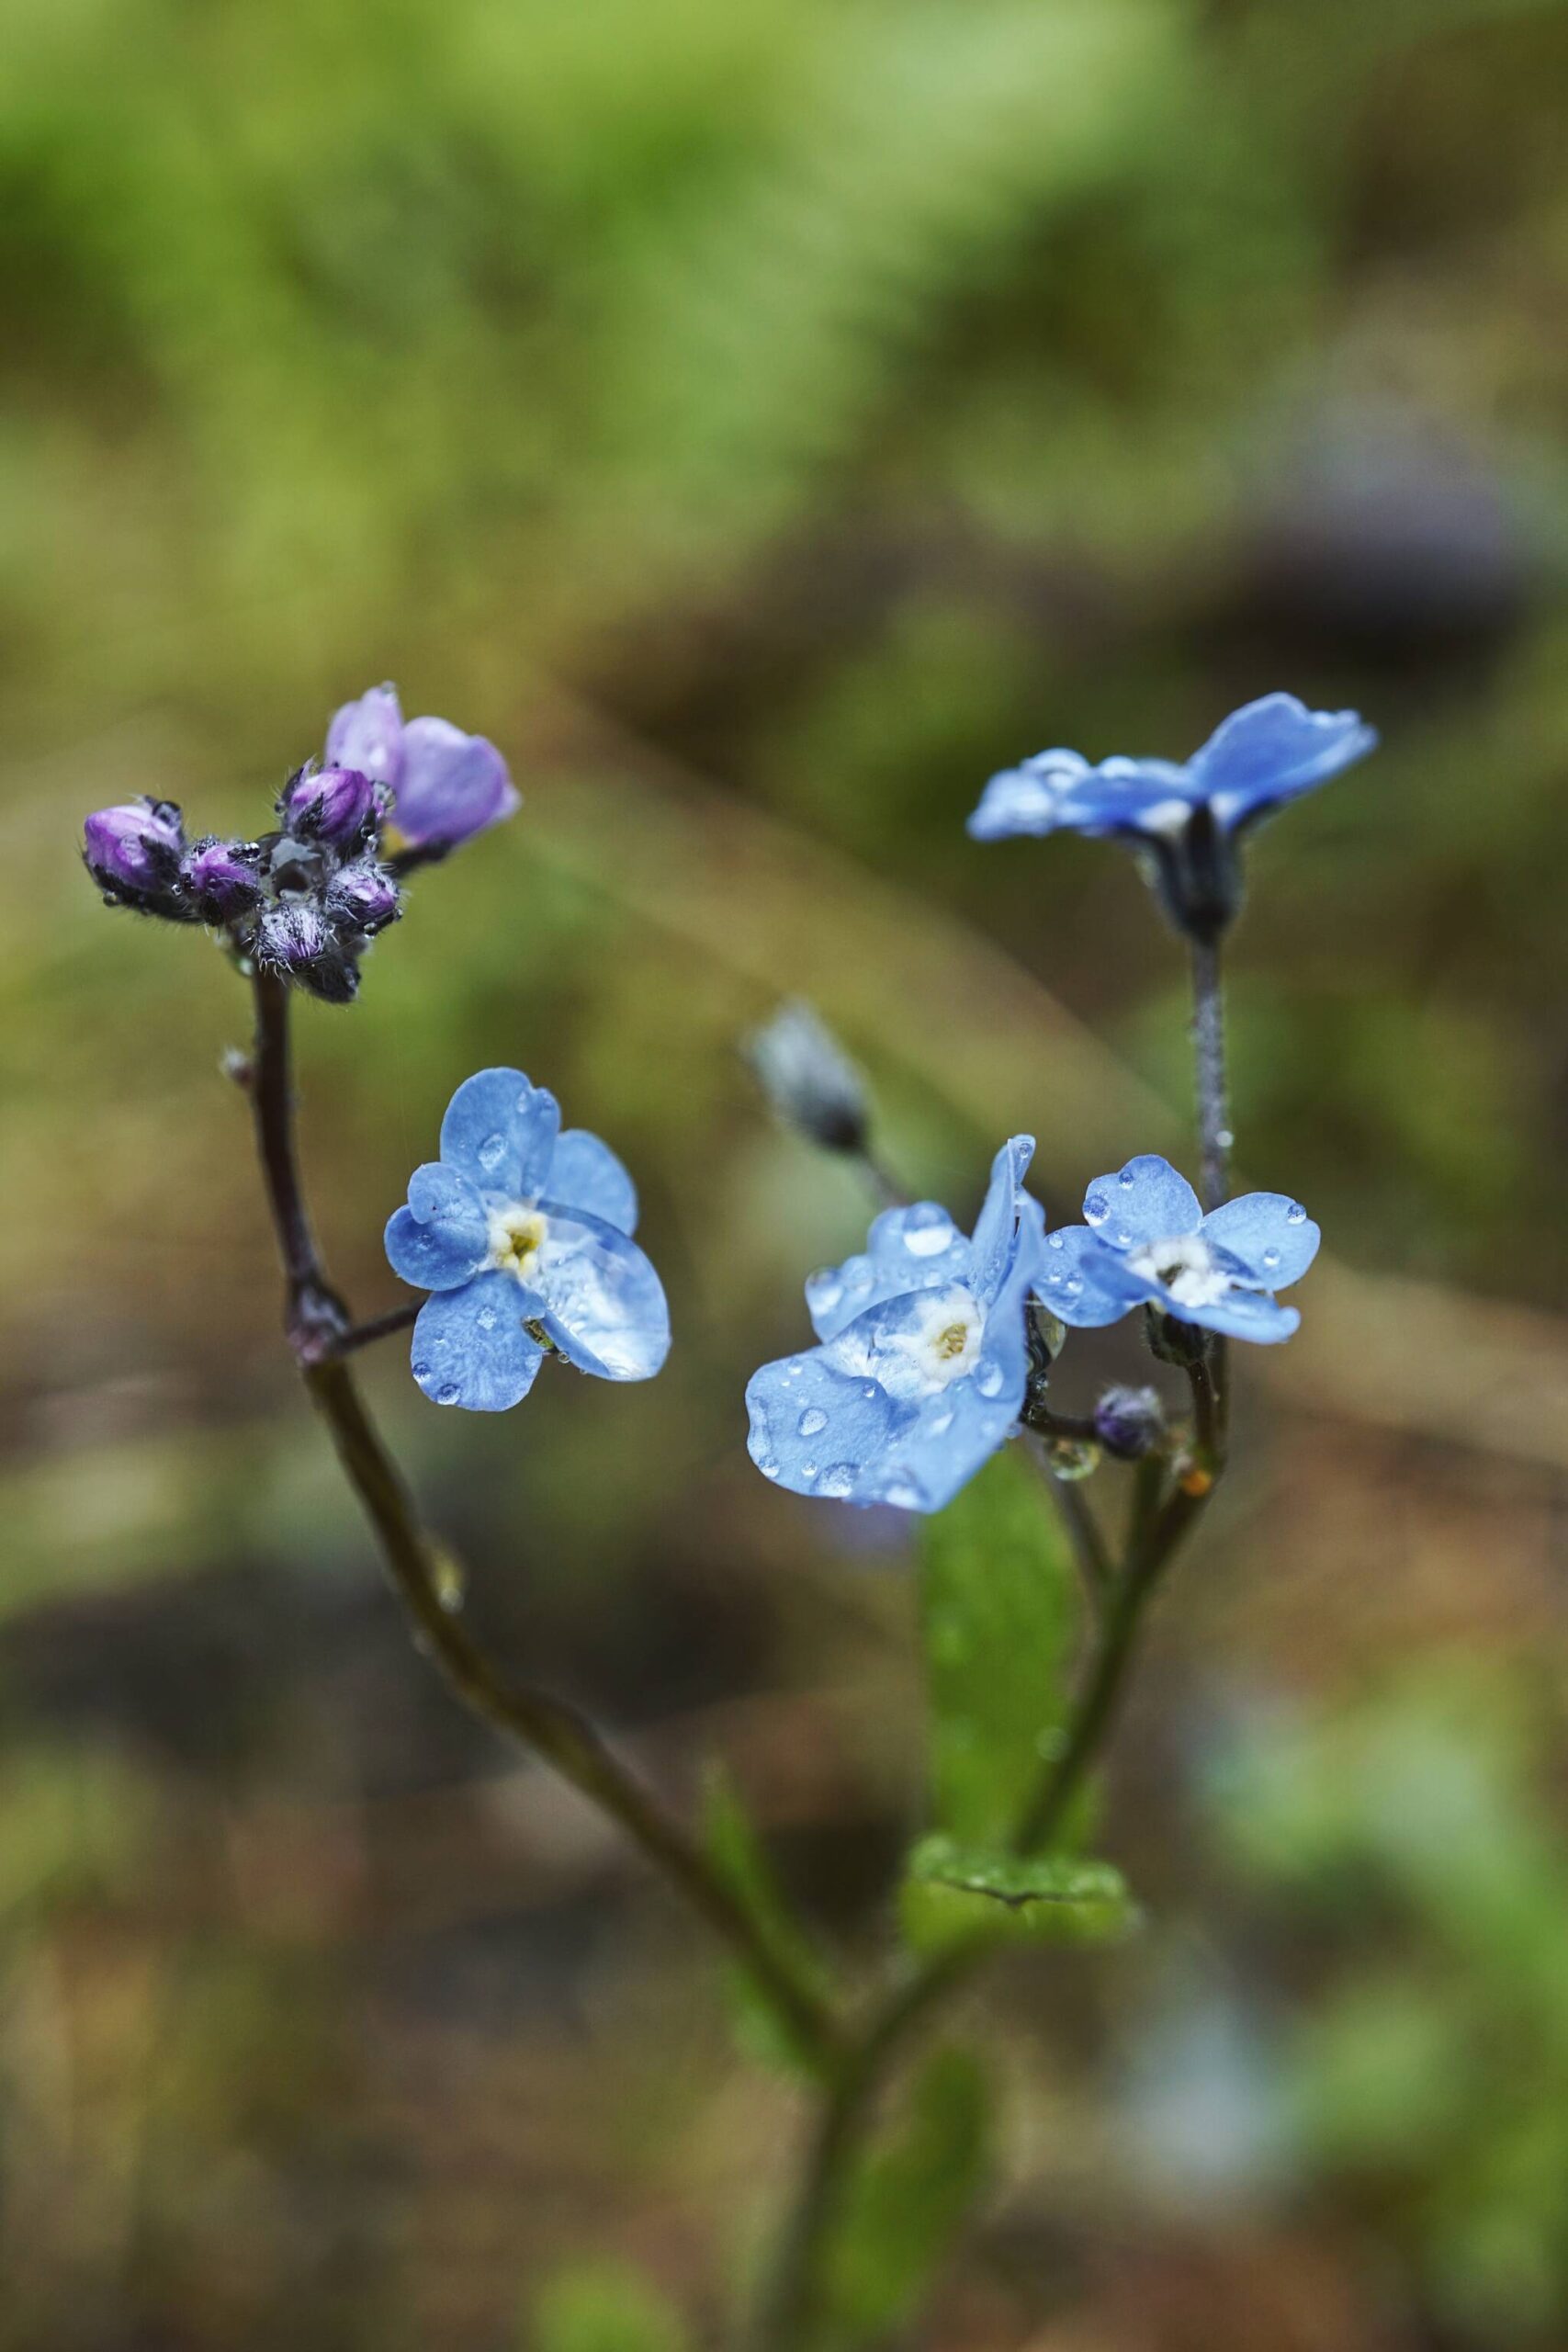 Raindrops collect on a cluster of forget-me-nots Saturday at Prince of Wales Island. (Courtesy Photo / Marti Crutcher)